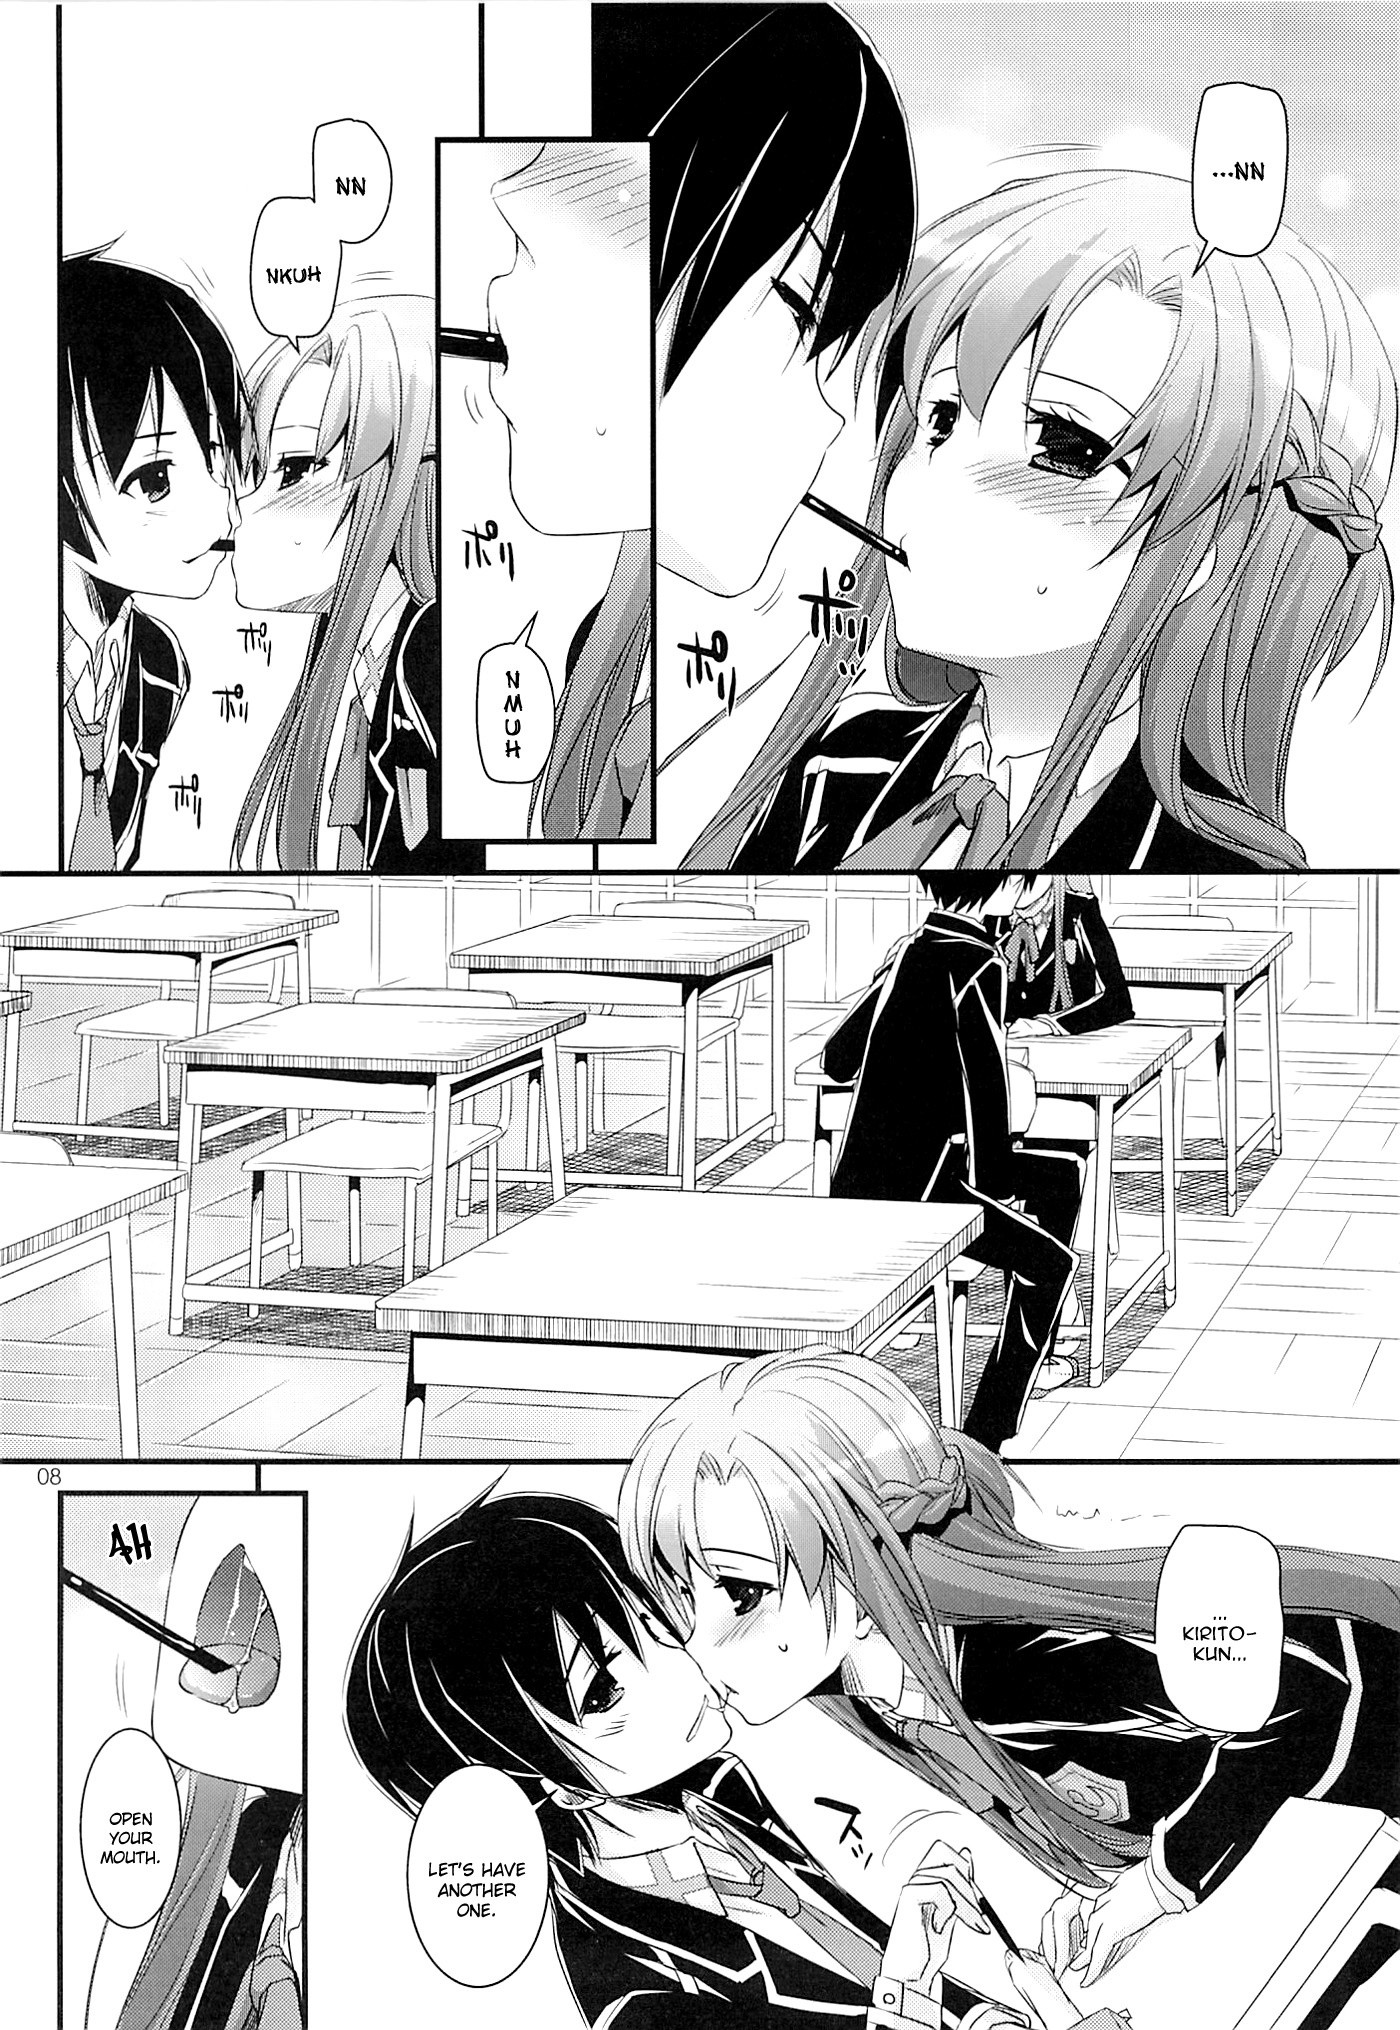 D.L. Action 74 hentai manga picture 7